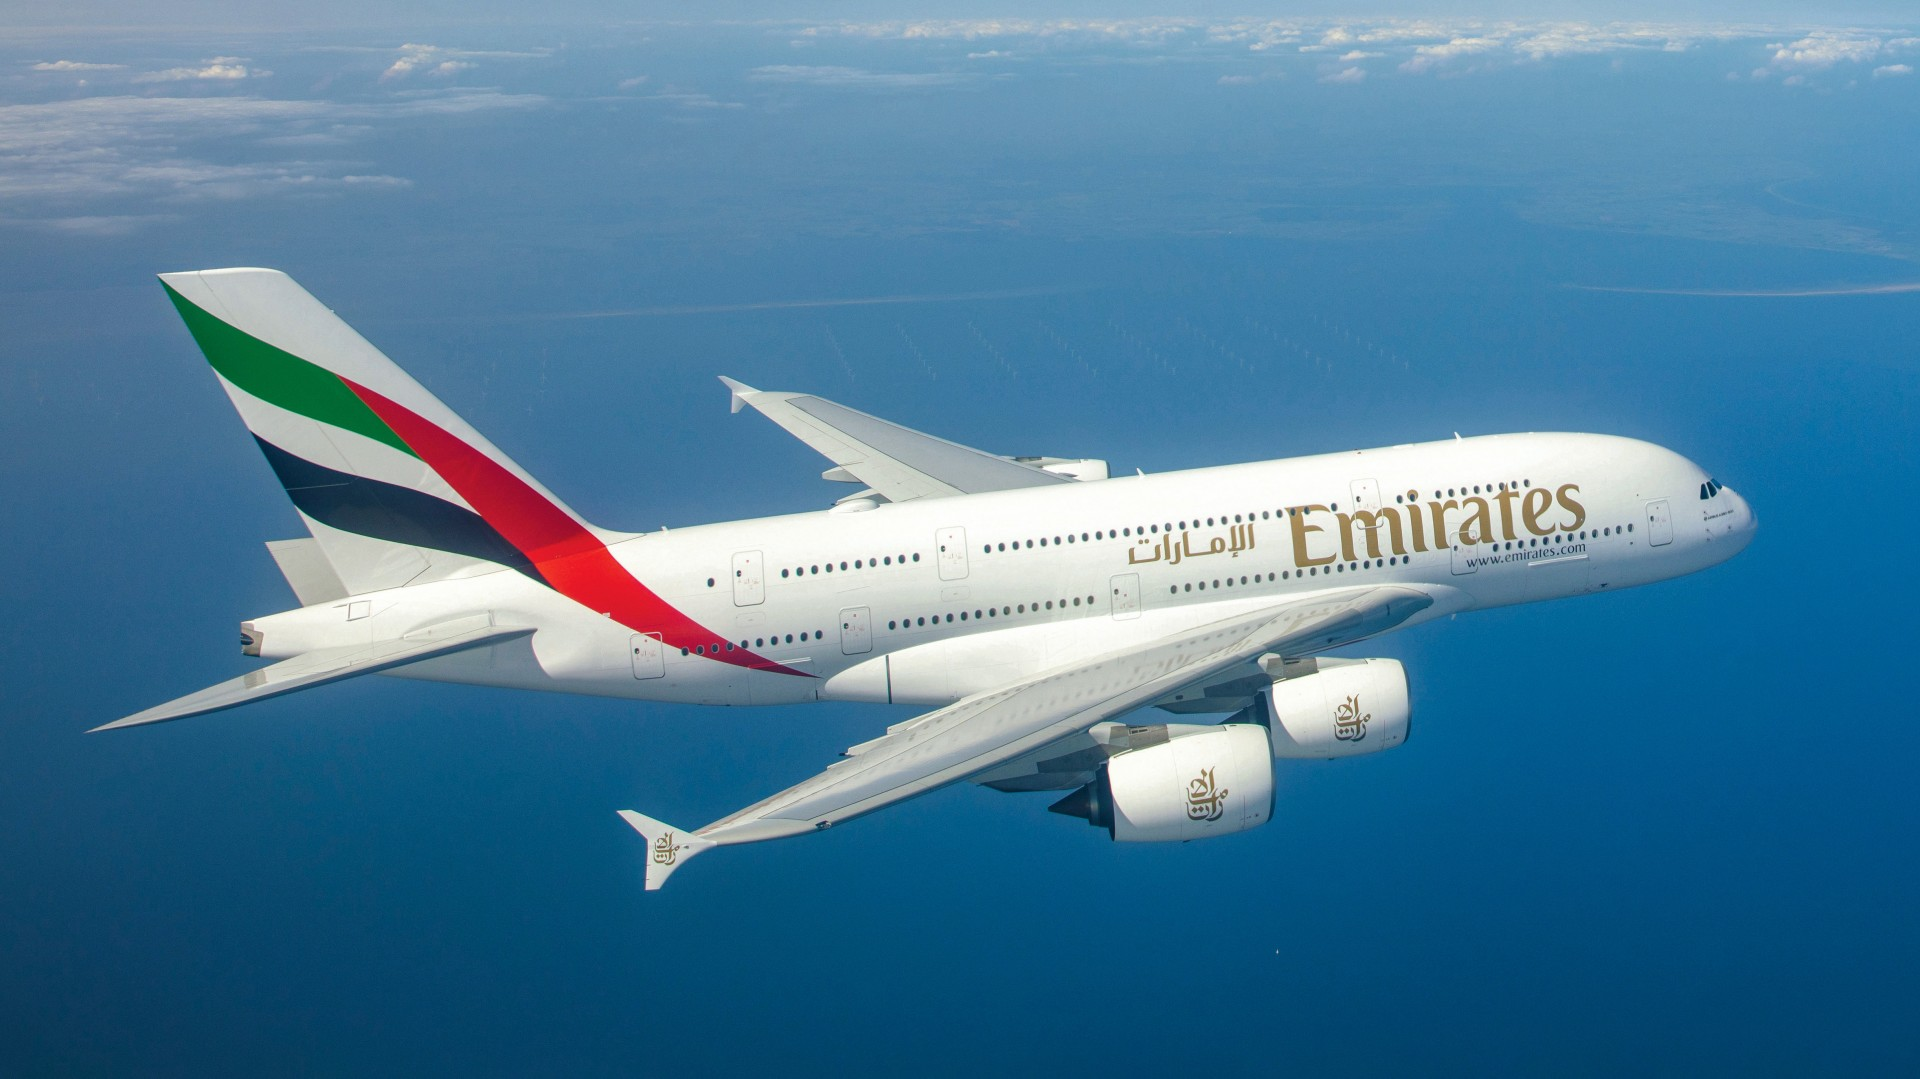 PICTURE OF AN EMIRATES A380 IN THE SKY OVER THE WATER.